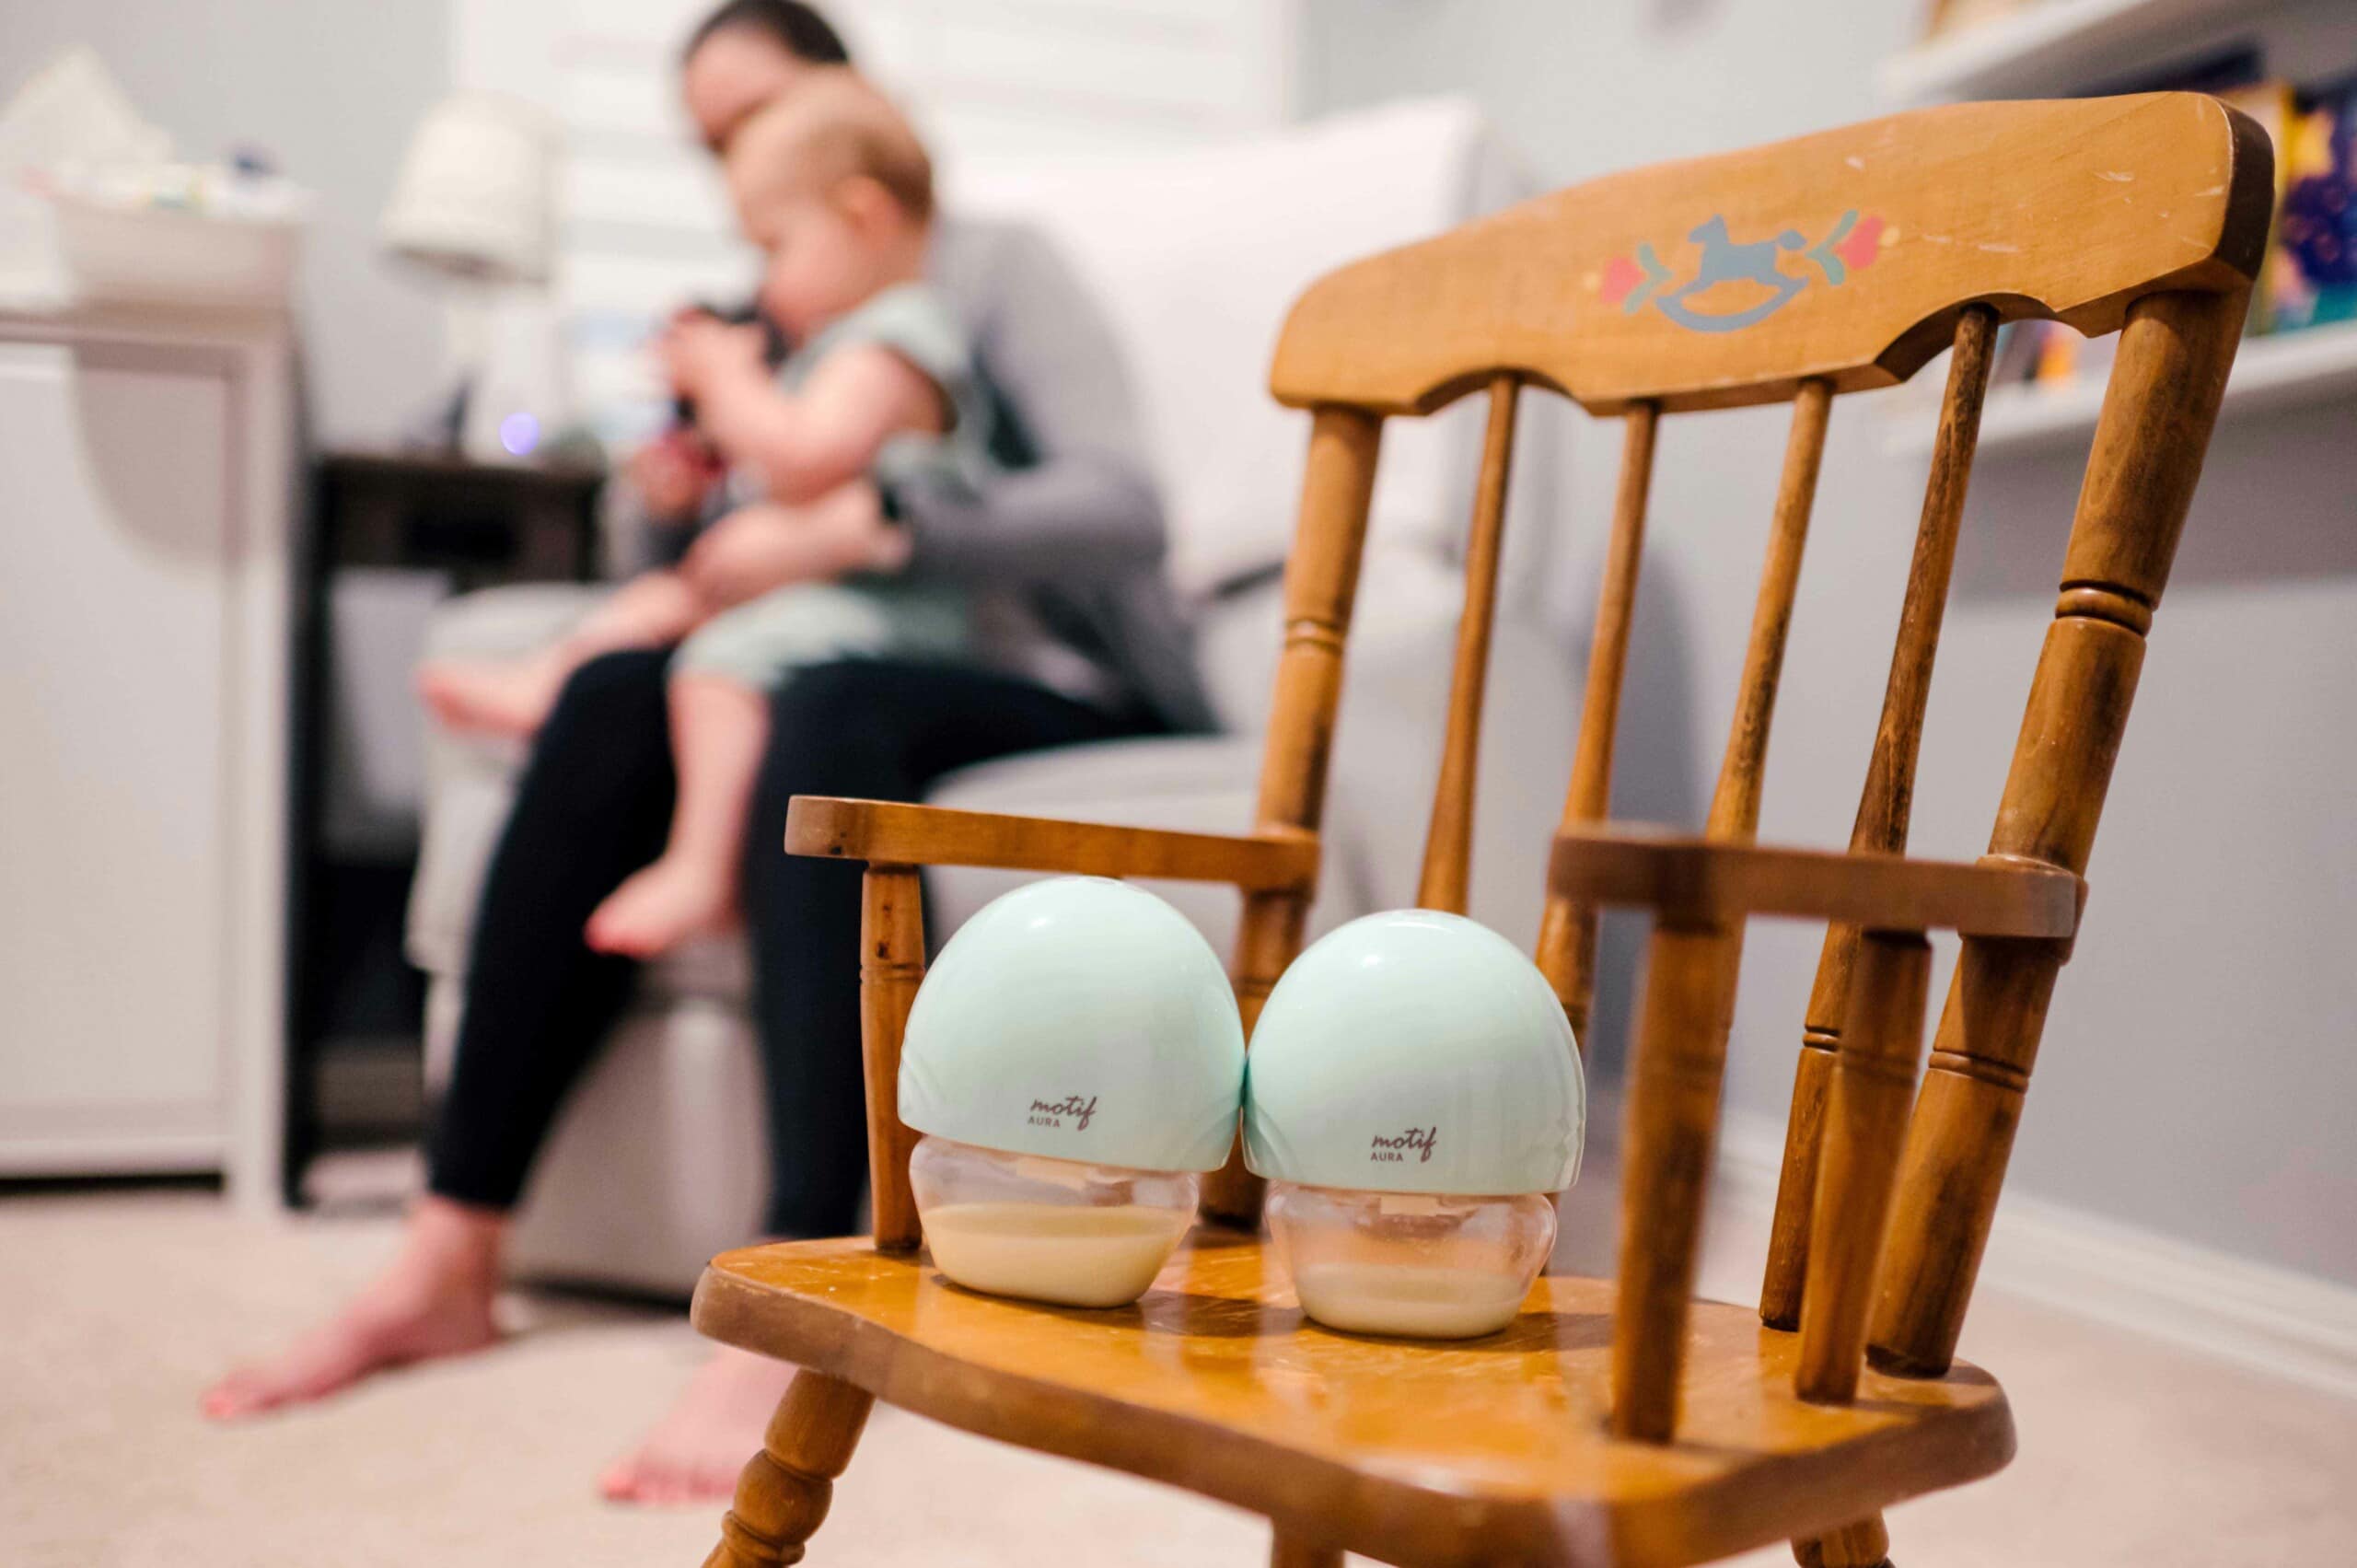 mom and baby in the background. two Motif wearable breast pumps sitting on rocking chair.